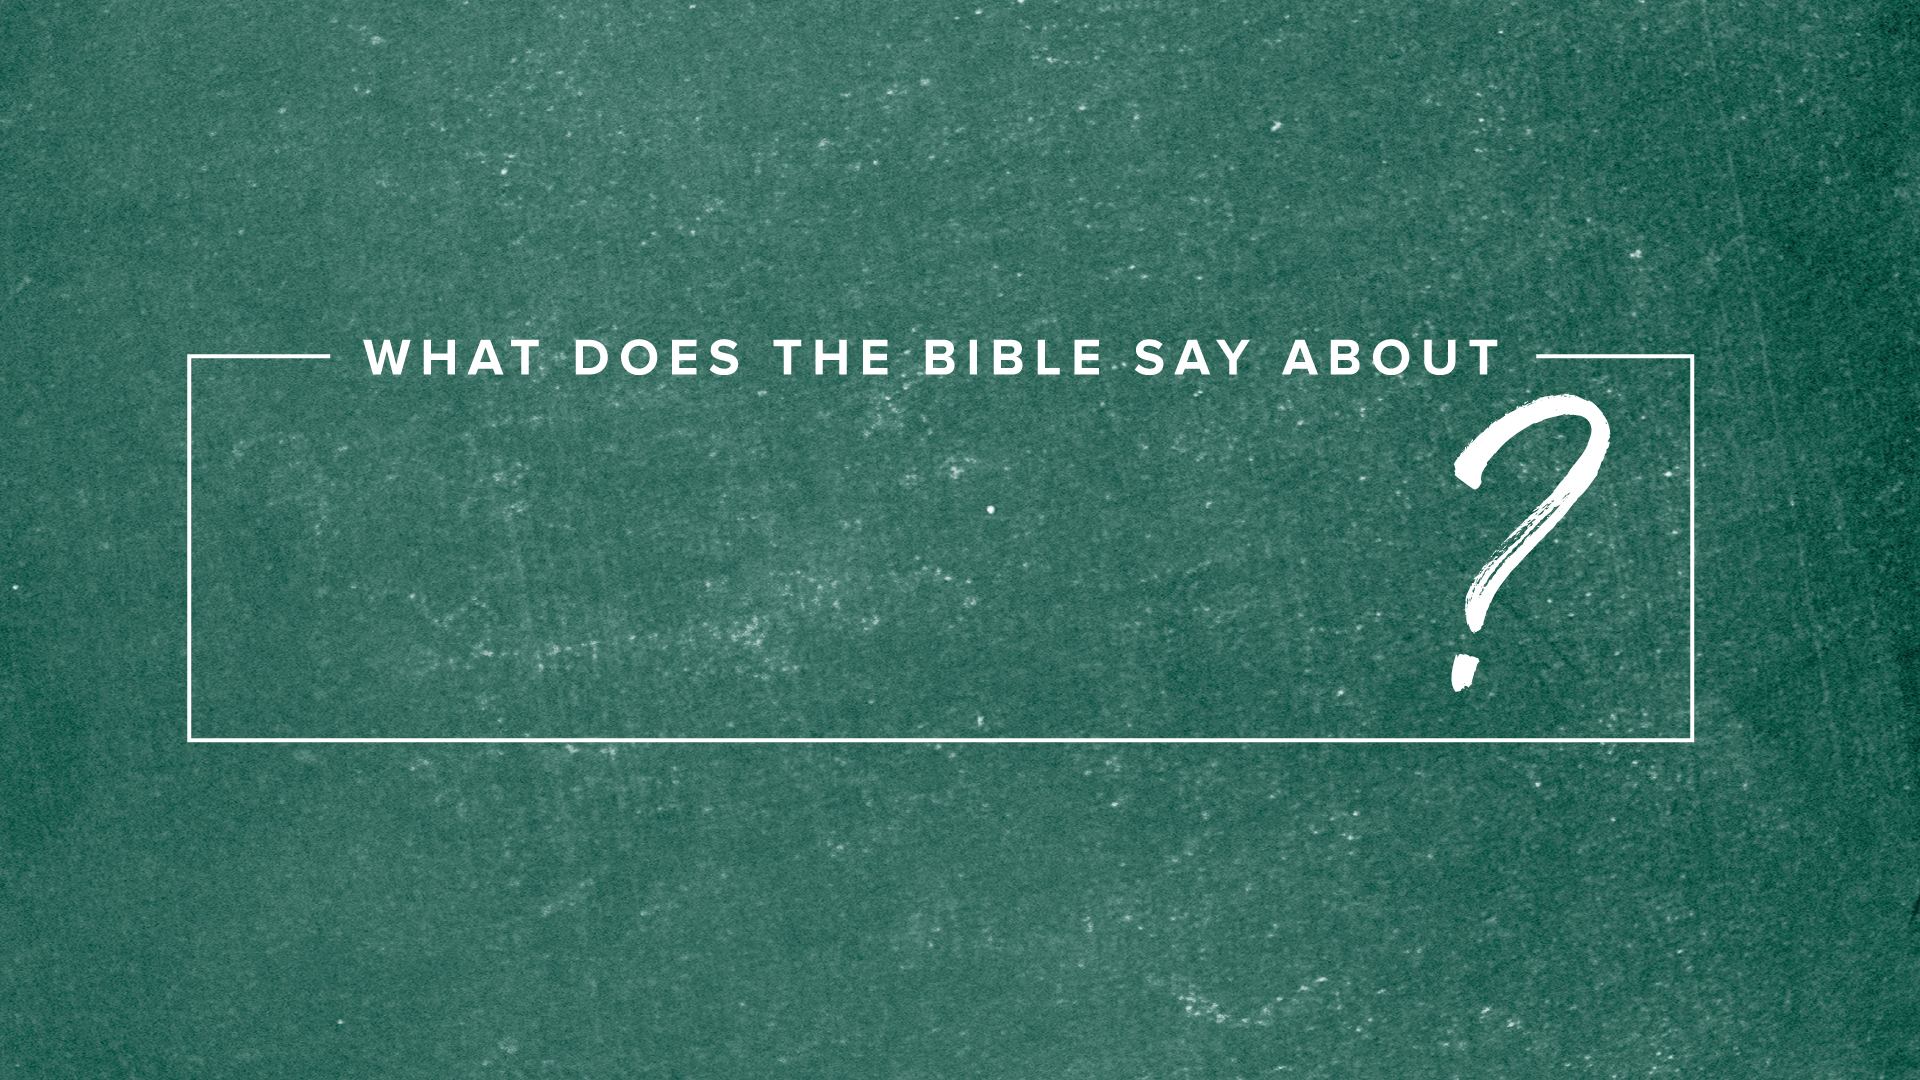 What Does The Bible Say About ___? Immigration